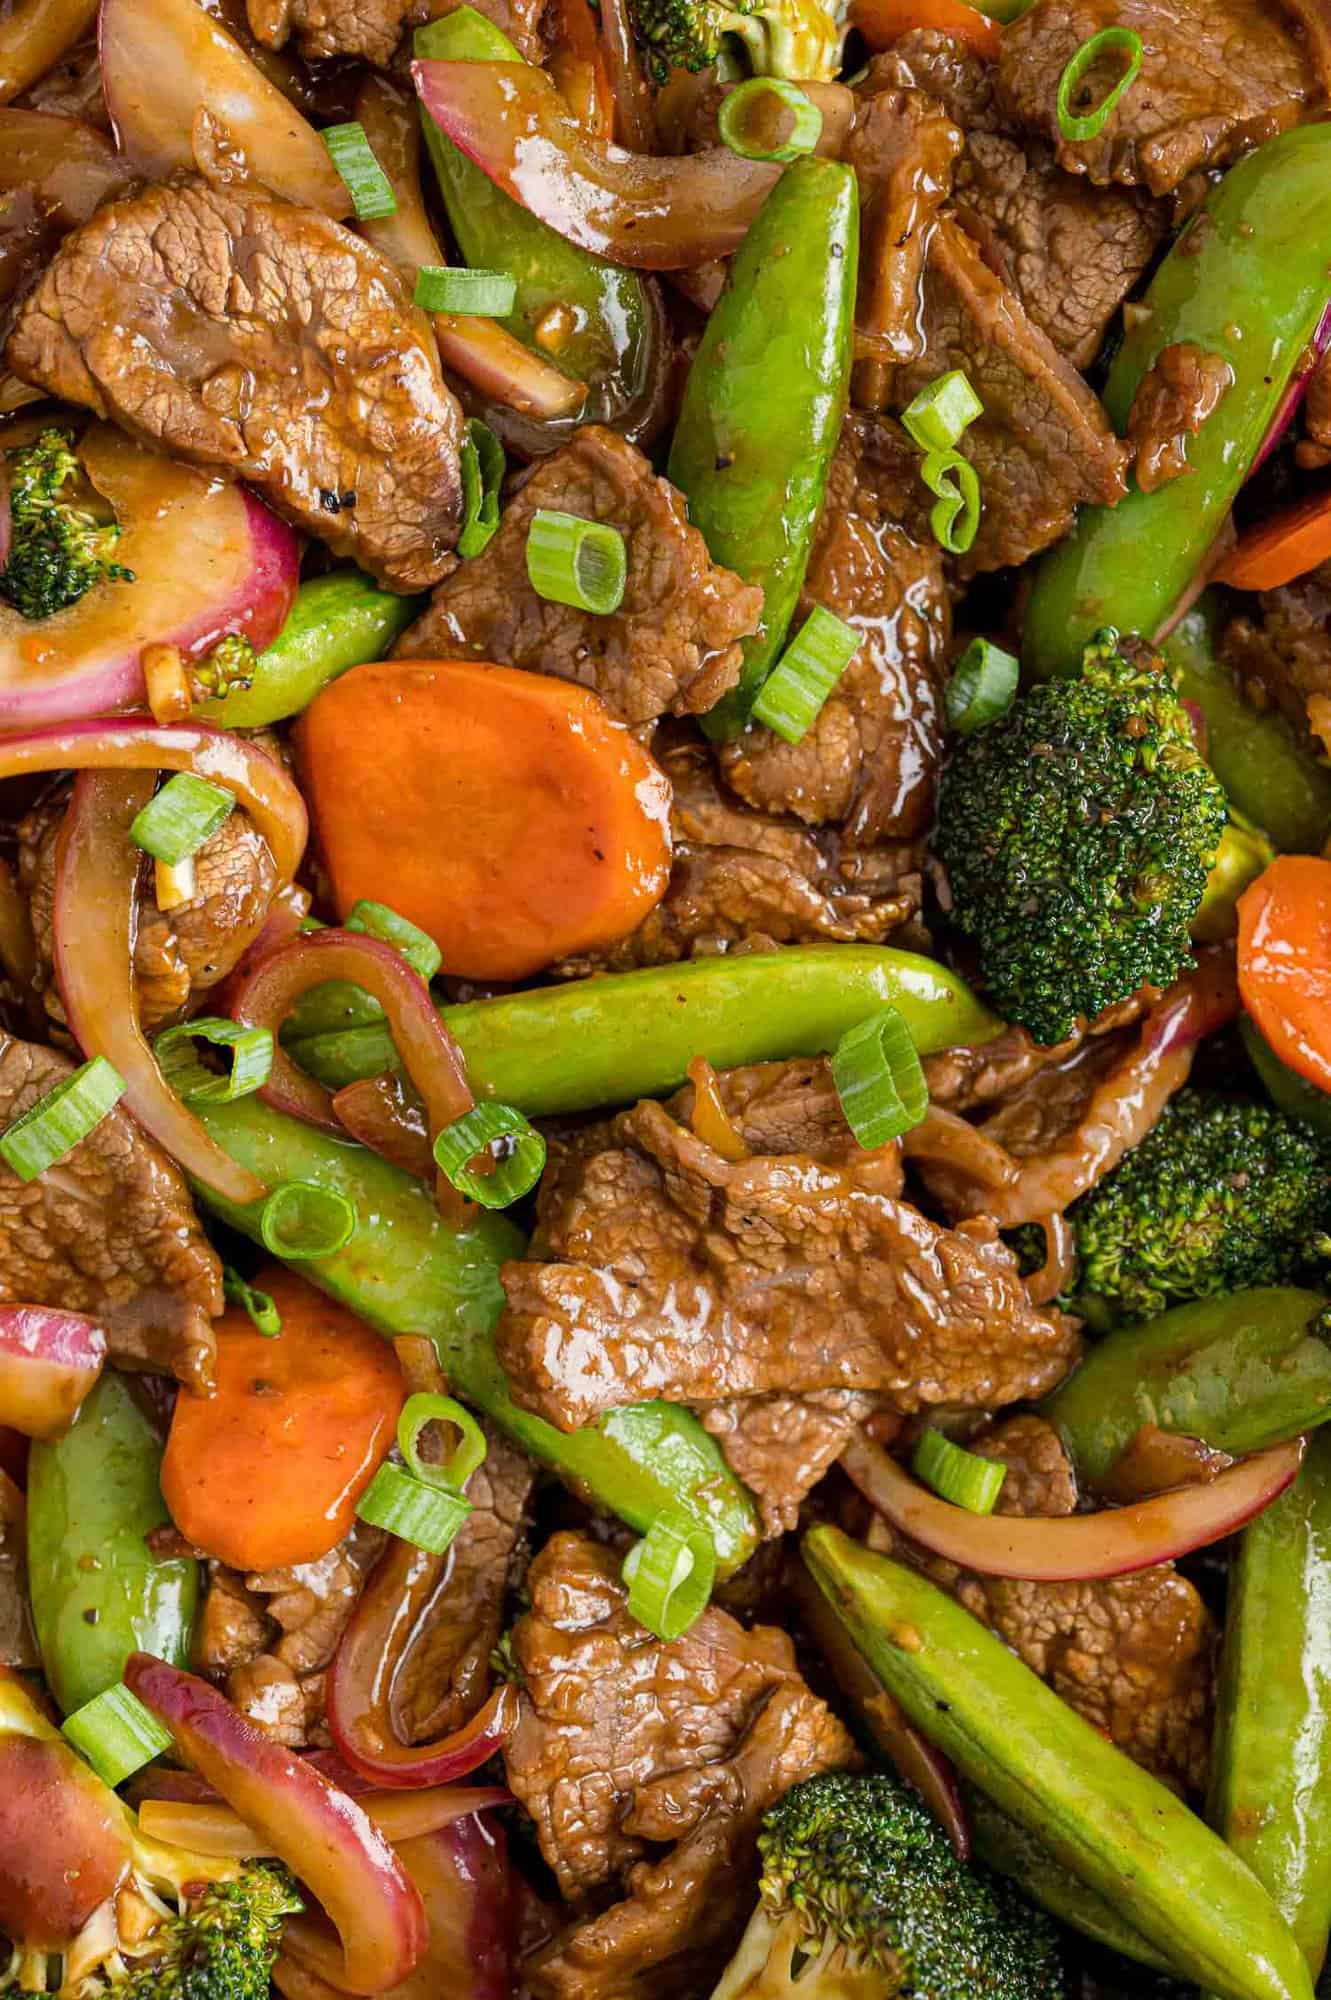 Beef and vegetable stir fry filling the frame.